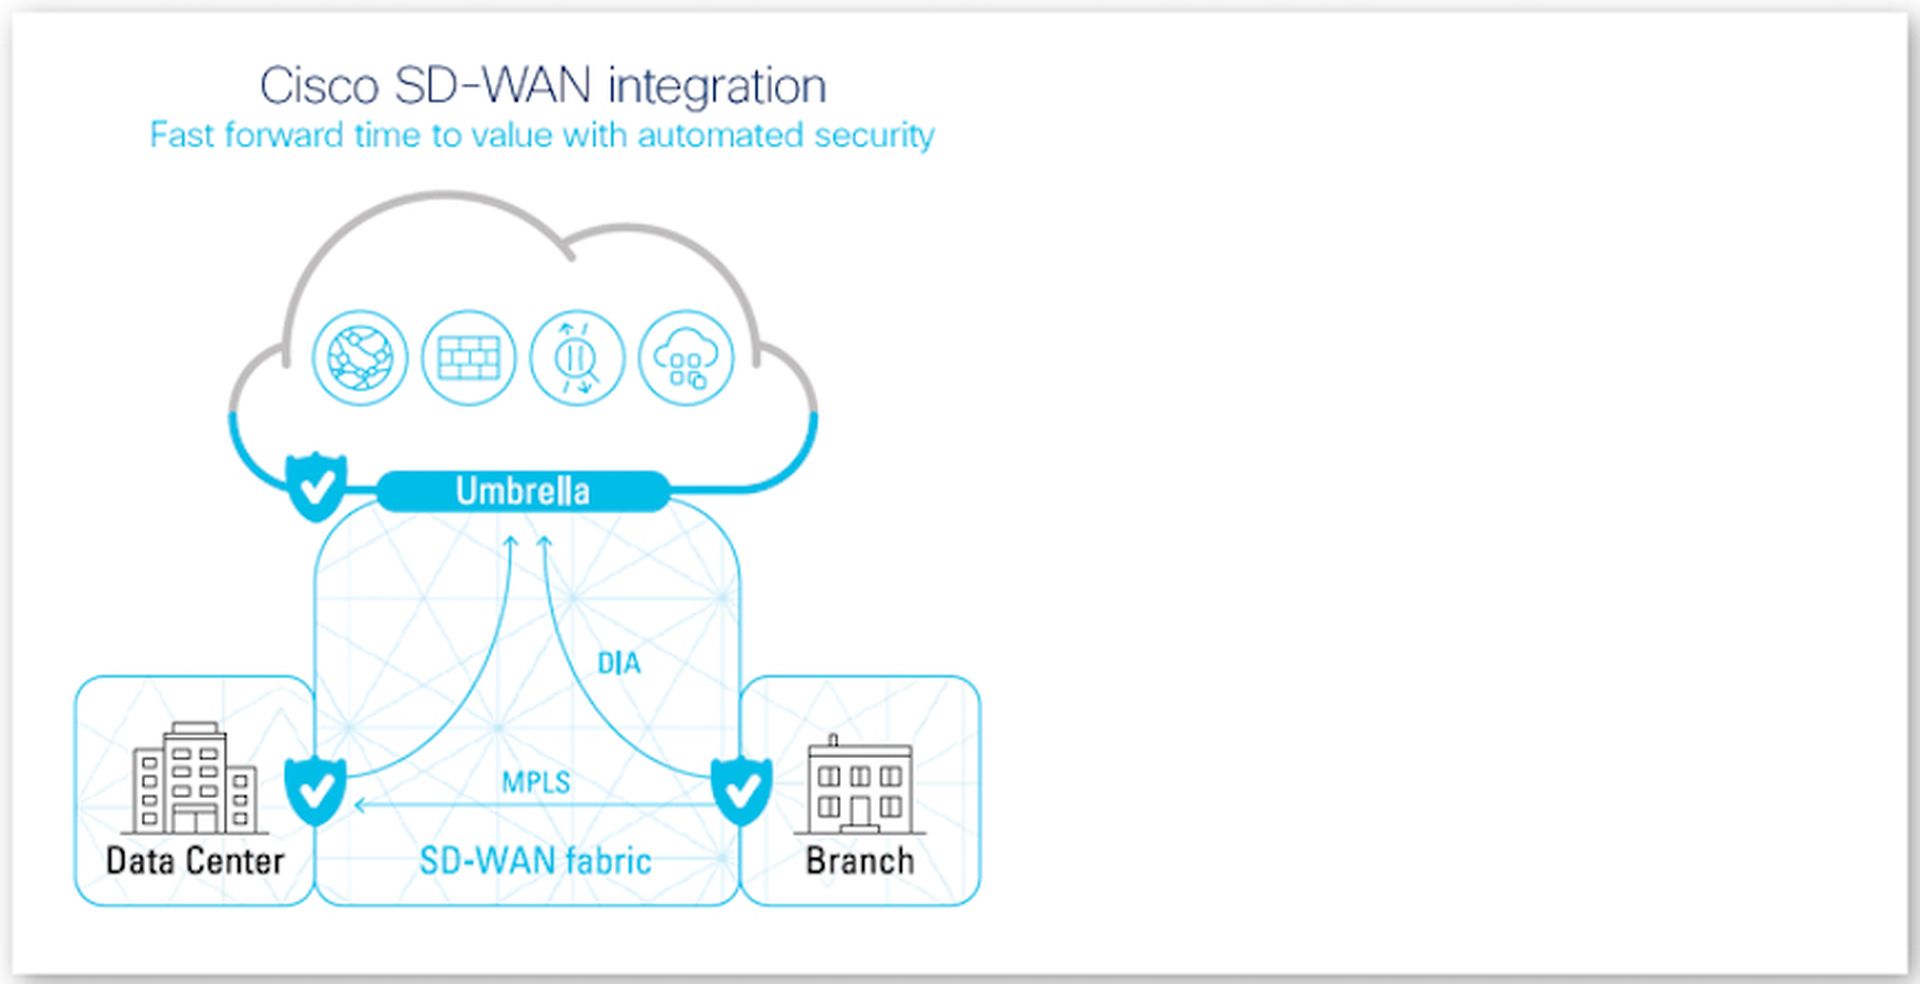 Cisco SD-WAN cloud-scale architecture is
simplicity for every size of organization